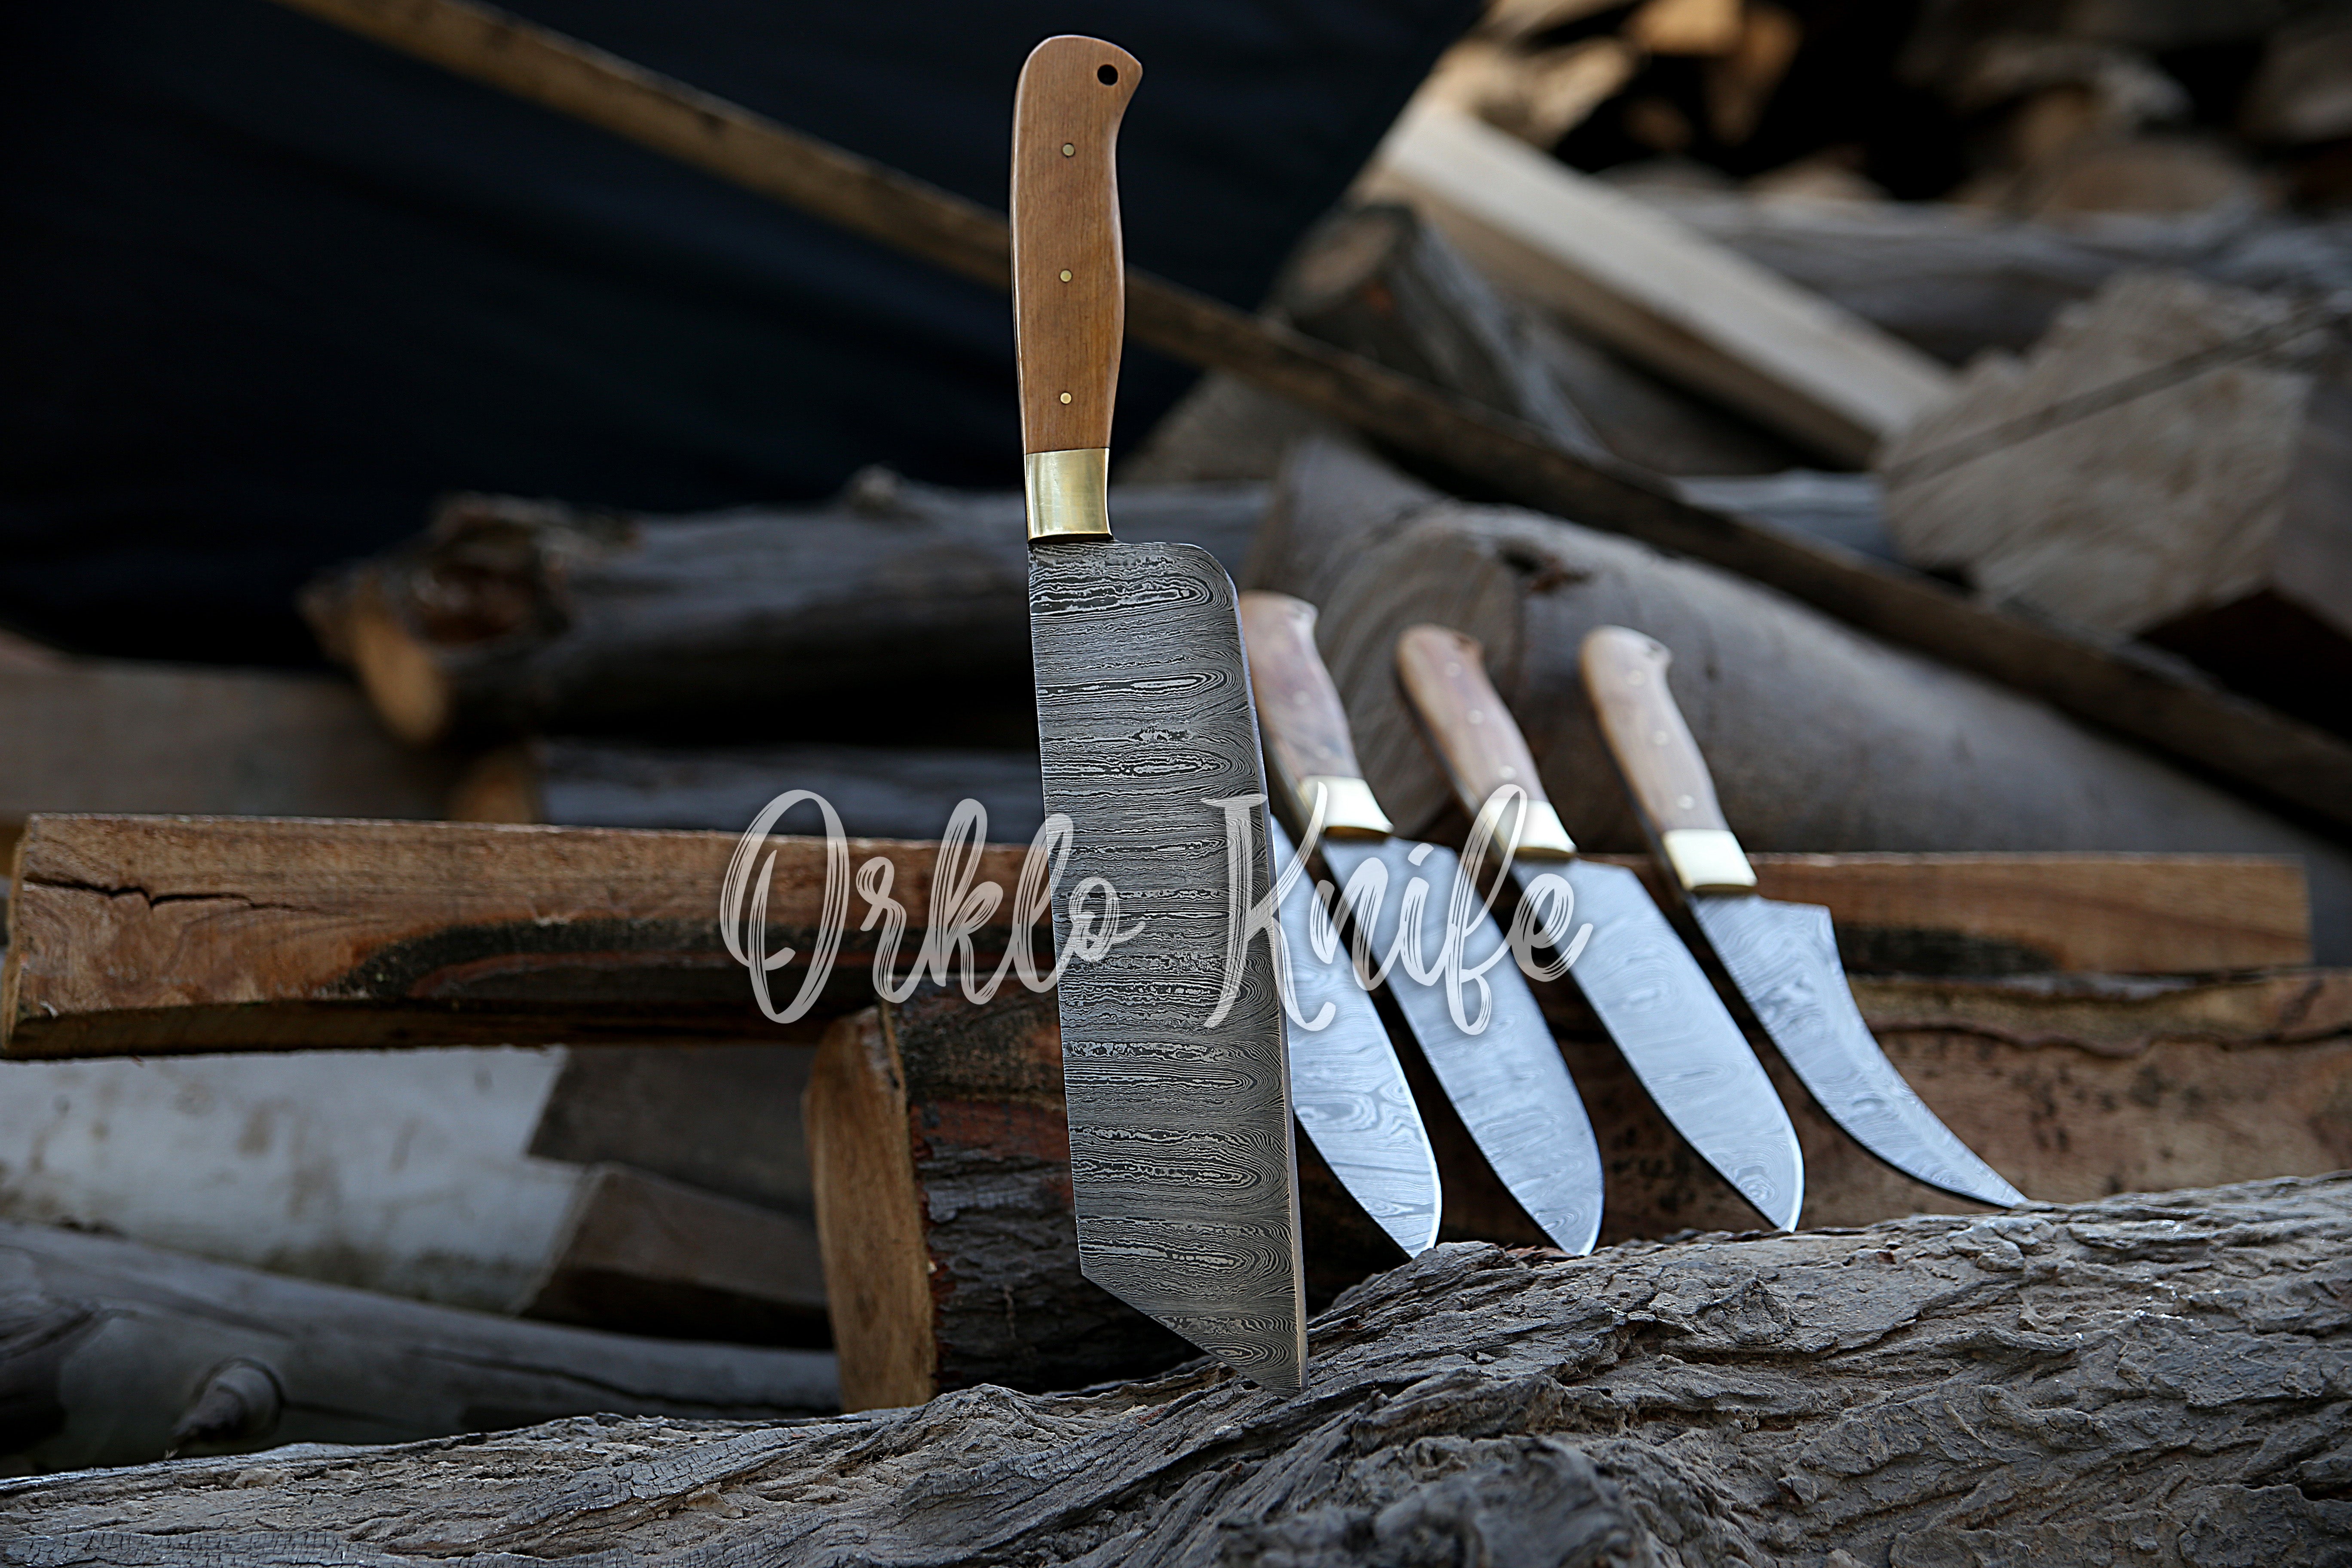 Hand Forged Chef Knives Kitchen Set Damascus Steel Knives Set